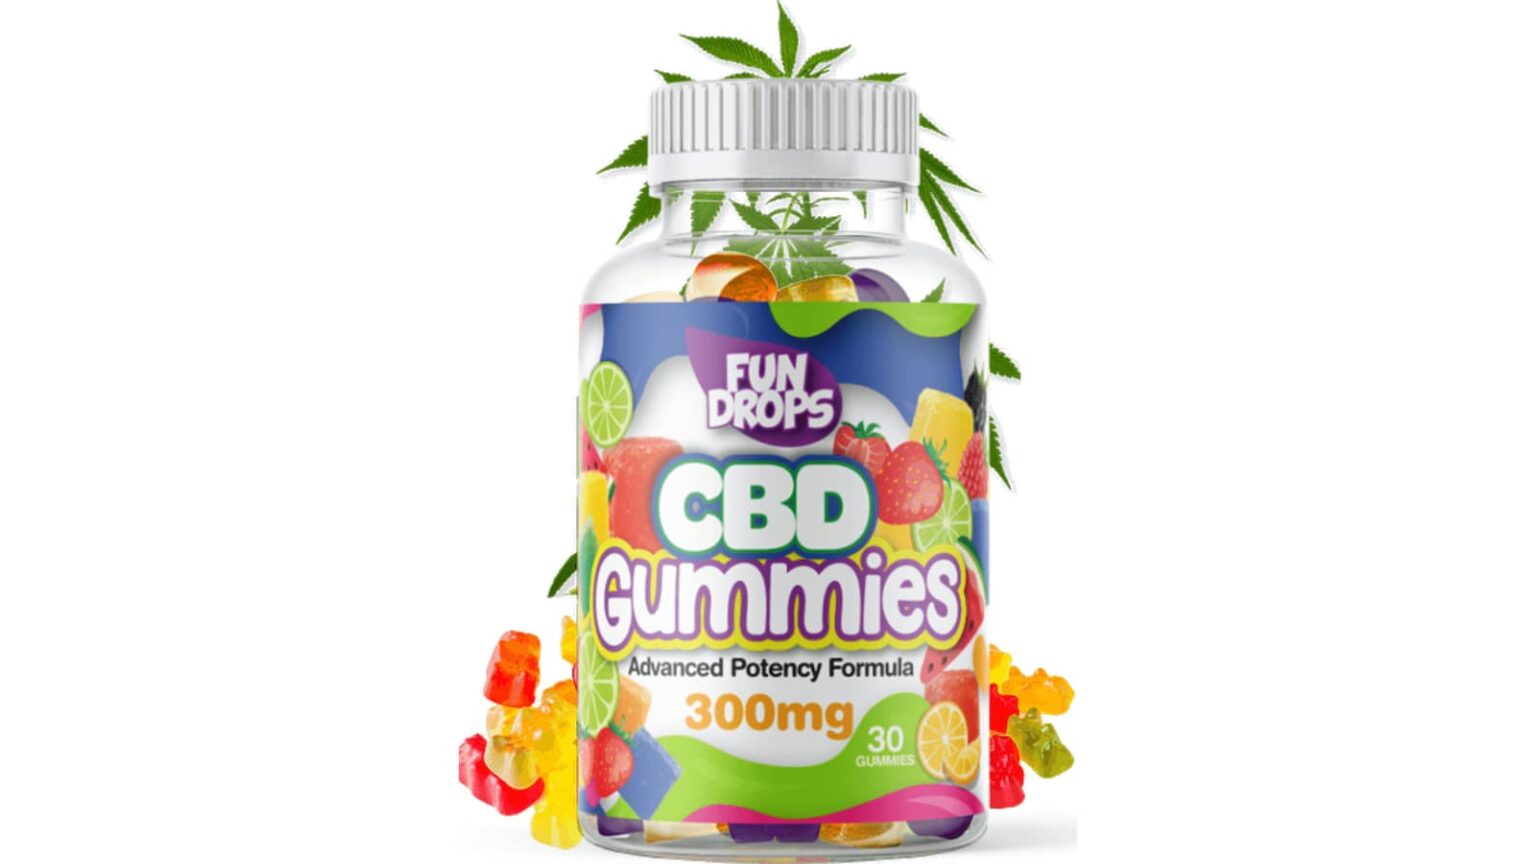 Fun Drop CBD Gummies are a product of multiple ingredients combined along with cannabidiol to develop a formula for men that would decrease their anxiety.